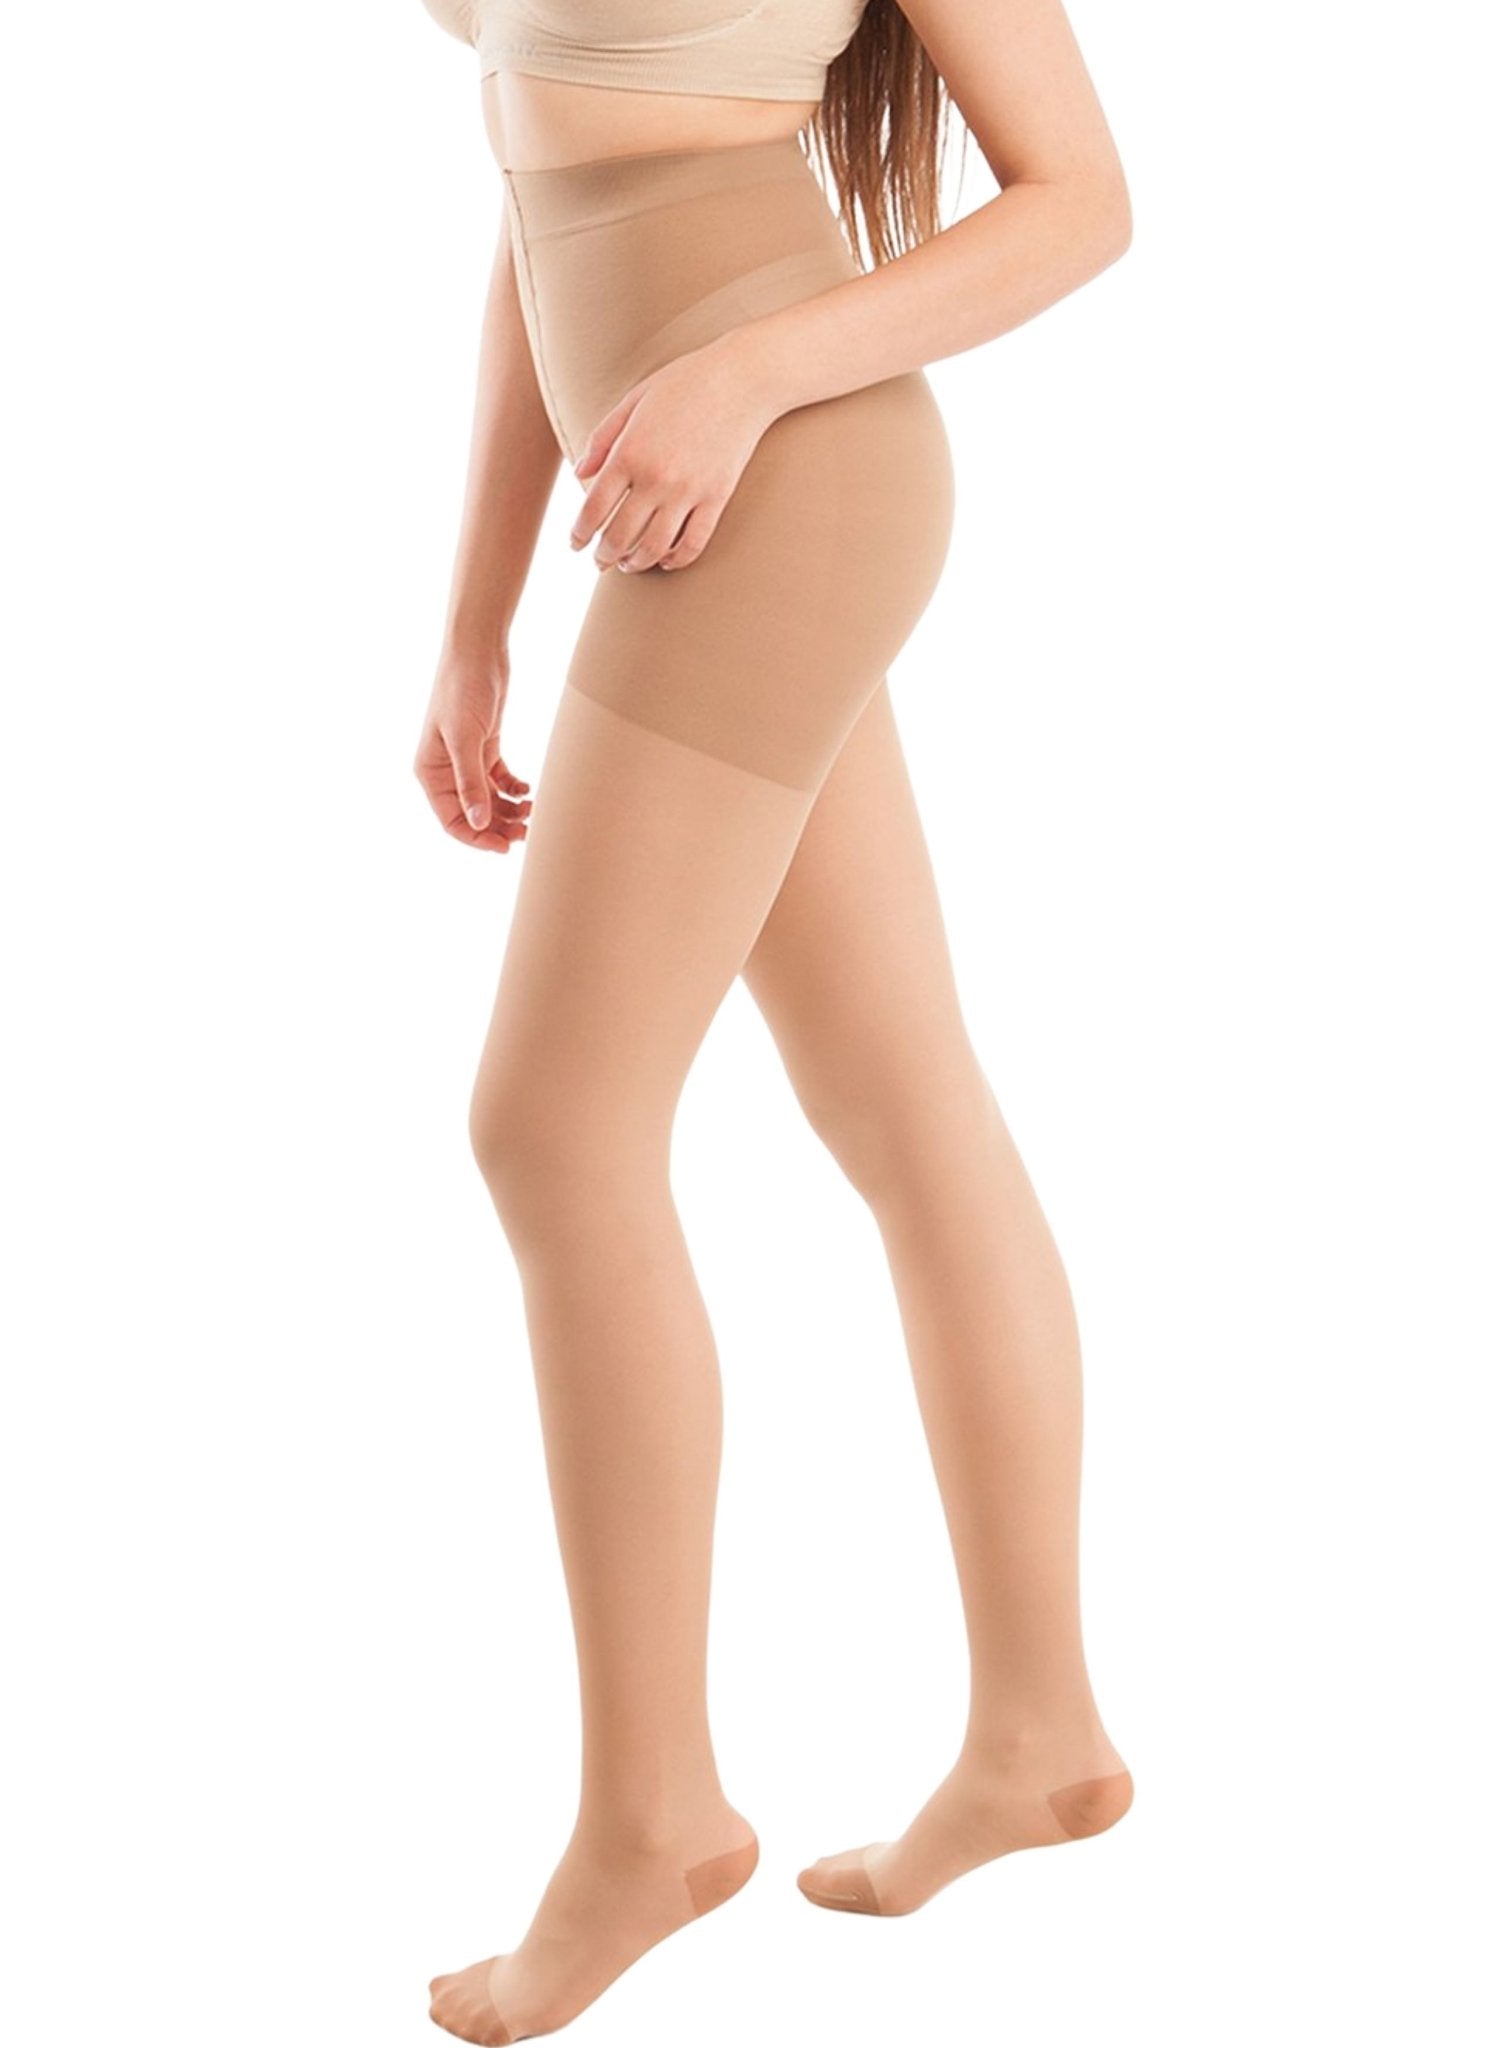 Sheer Pantyhose Graduated Medium Compression - Beige - Mums and Bumps